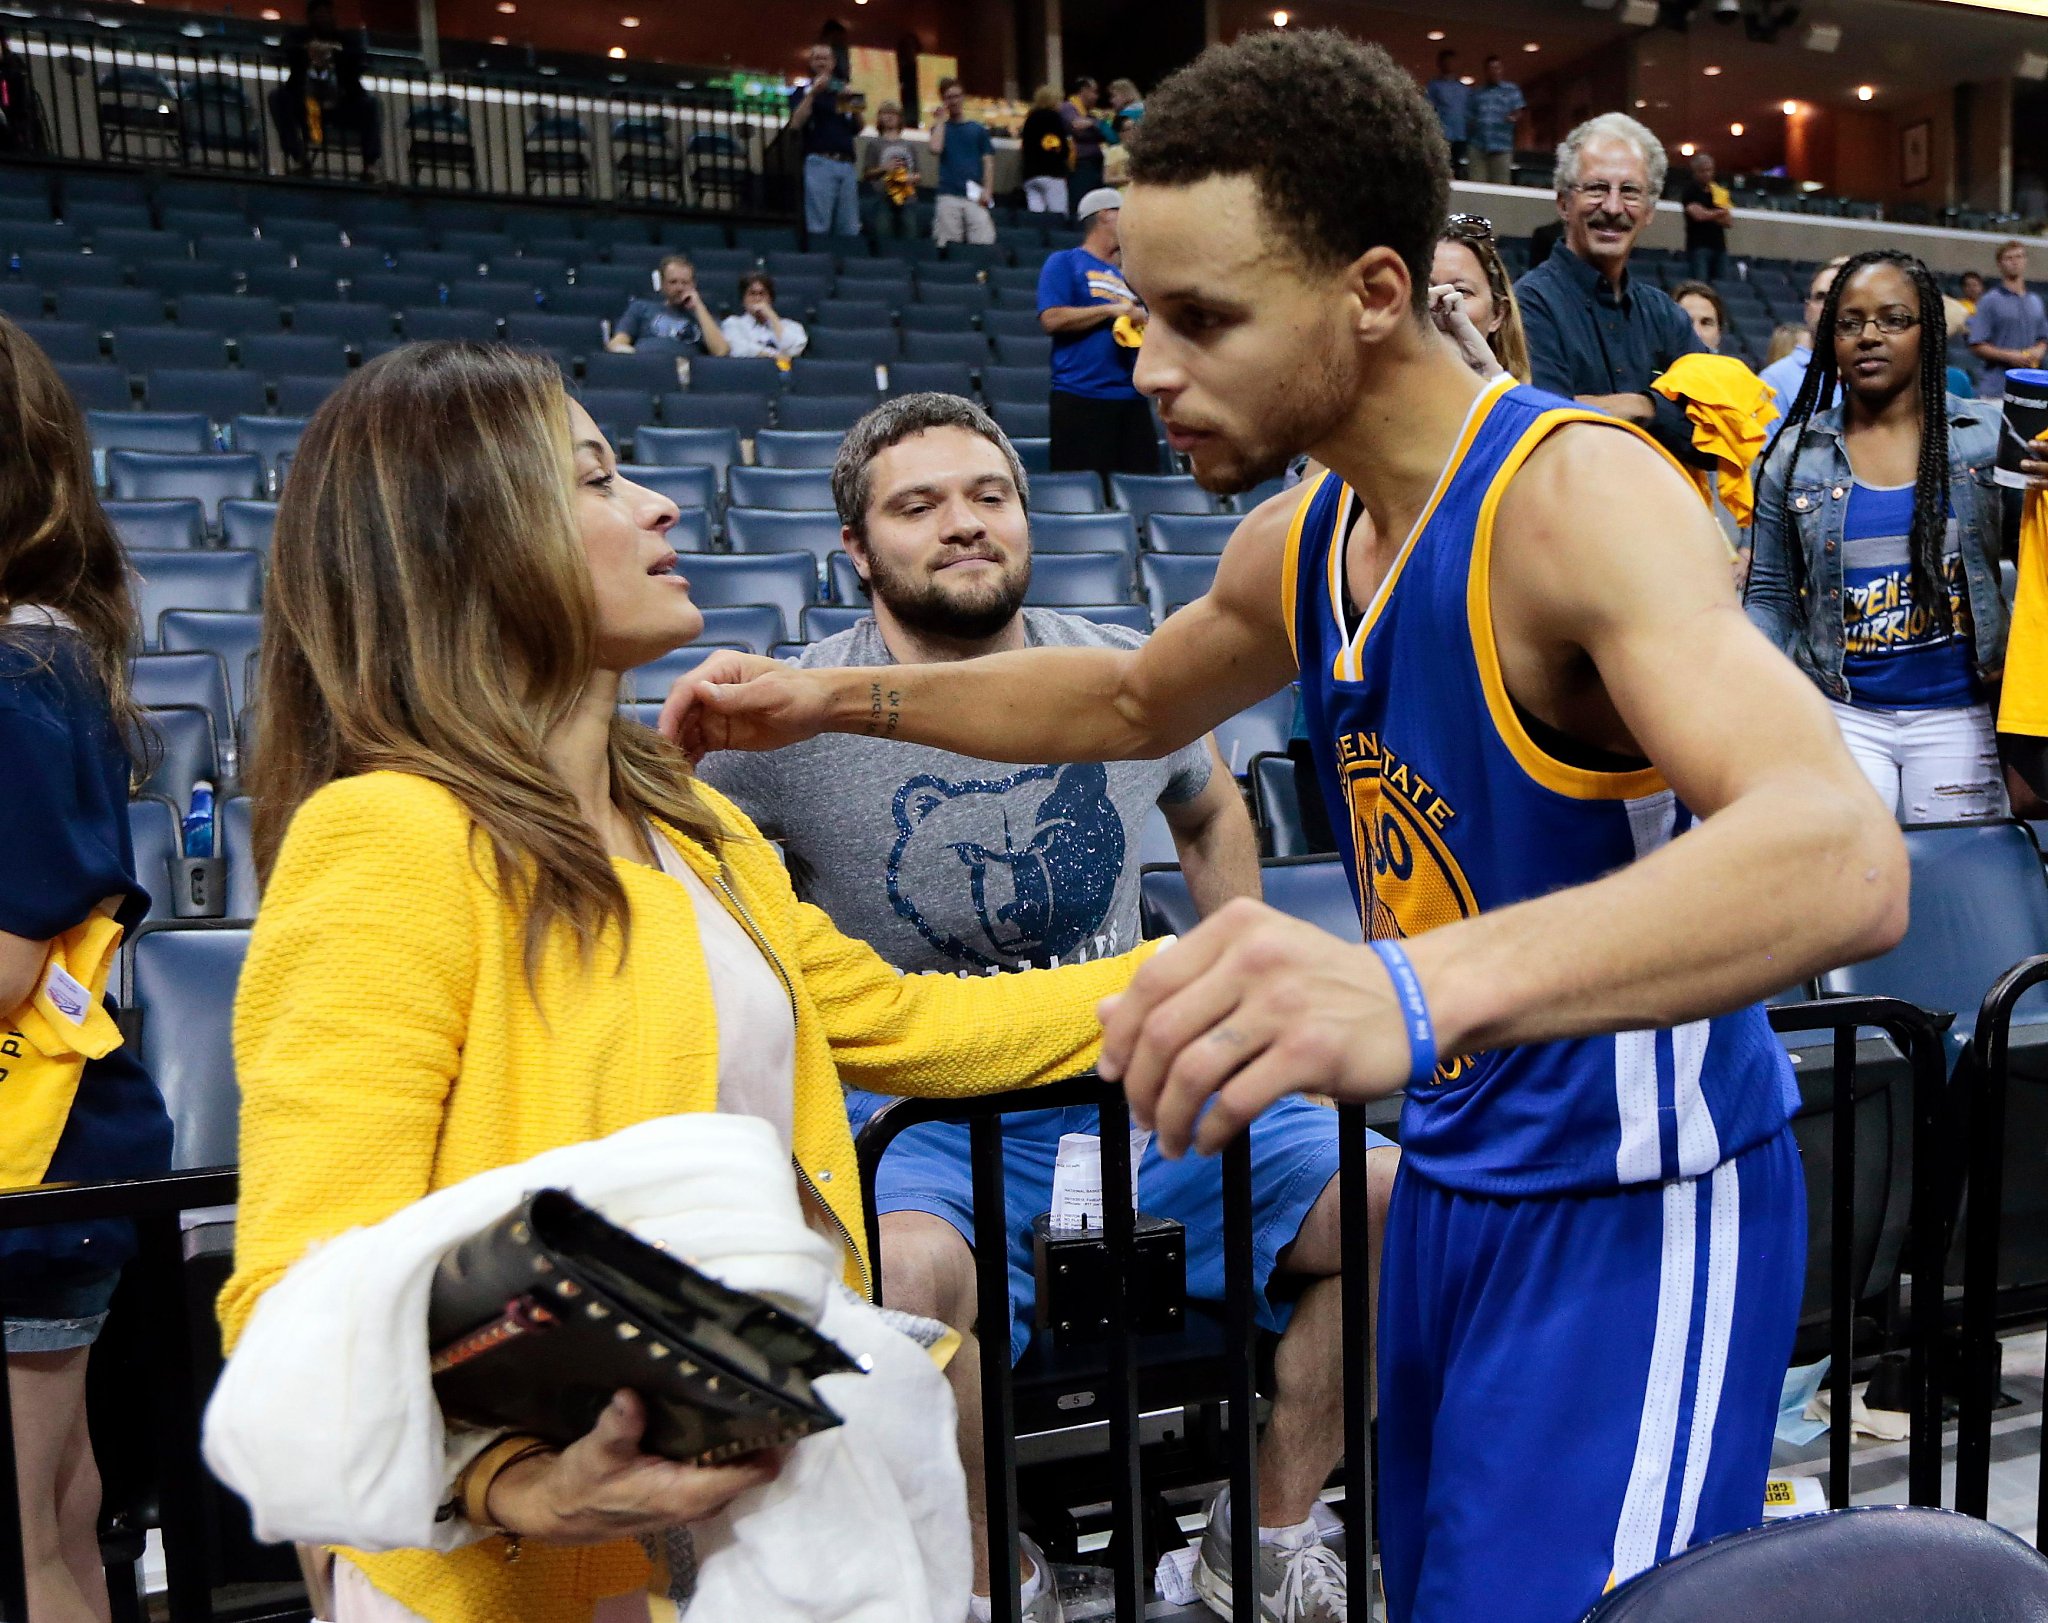 Sonya, the mother of millionaire Stephen Curry, discusses her challenging upbringing and the valuable life lessons it imparted to her